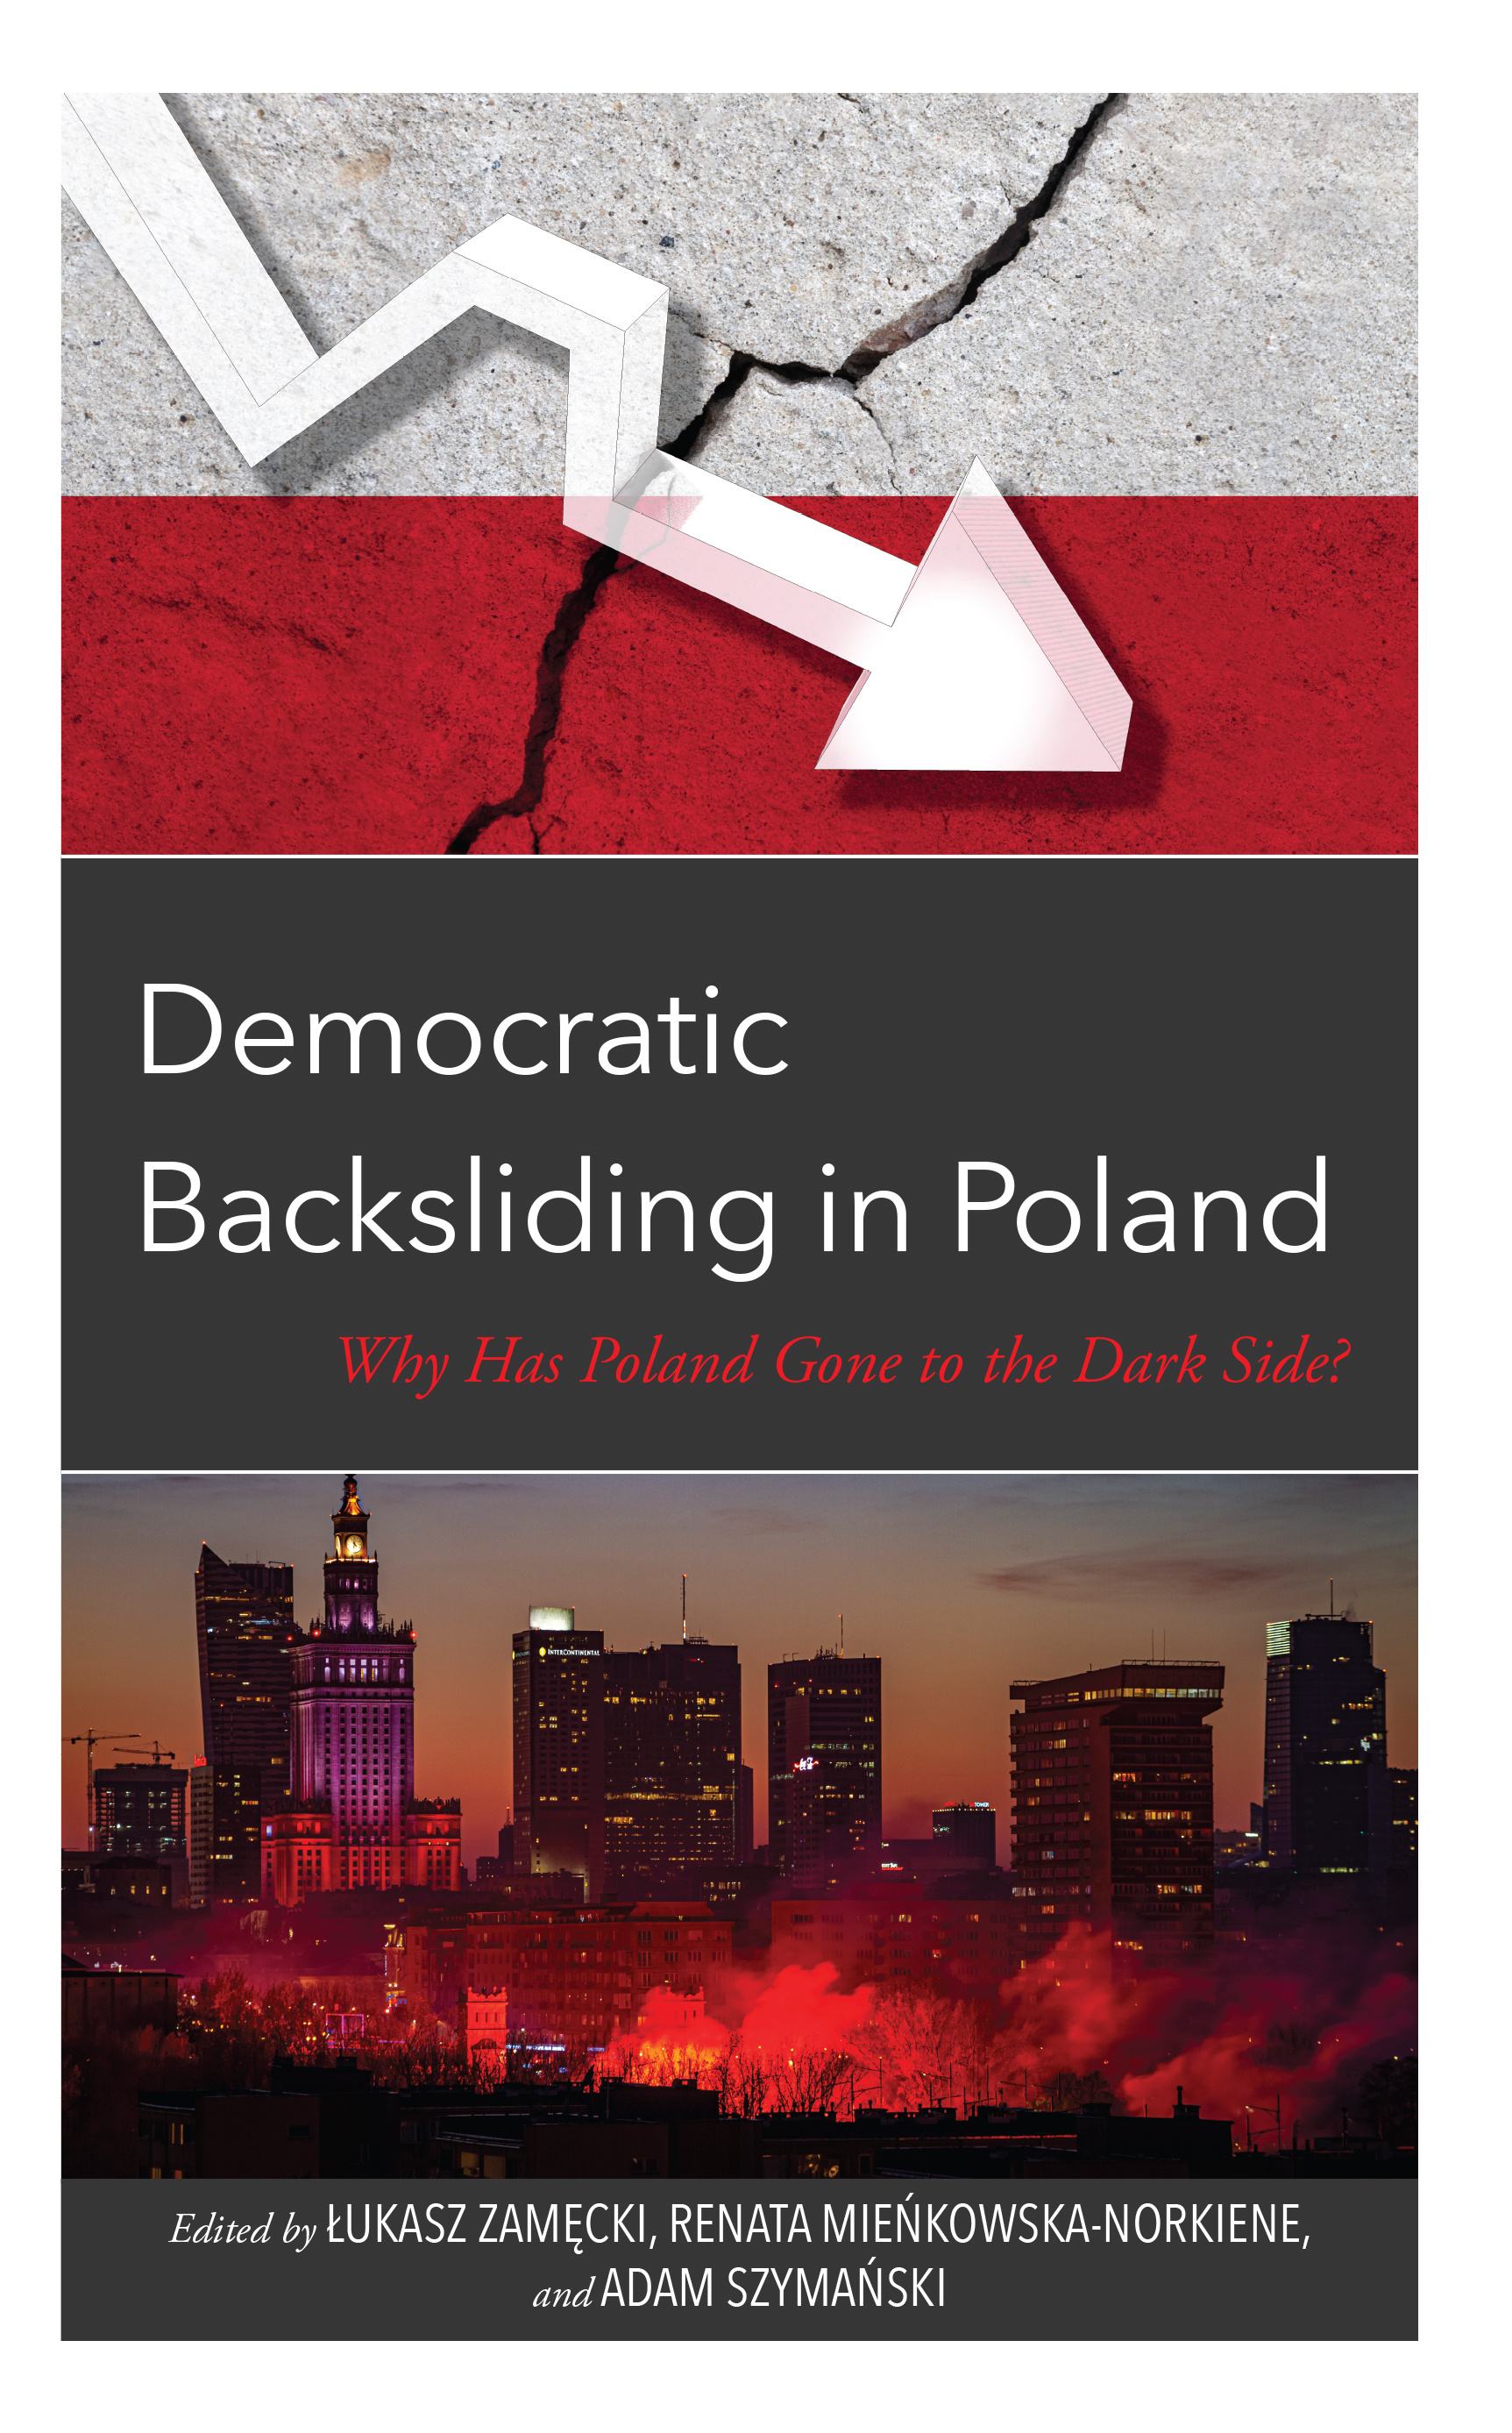 Democratic Backsliding in Poland: Why Has Poland Gone to the Dark Side